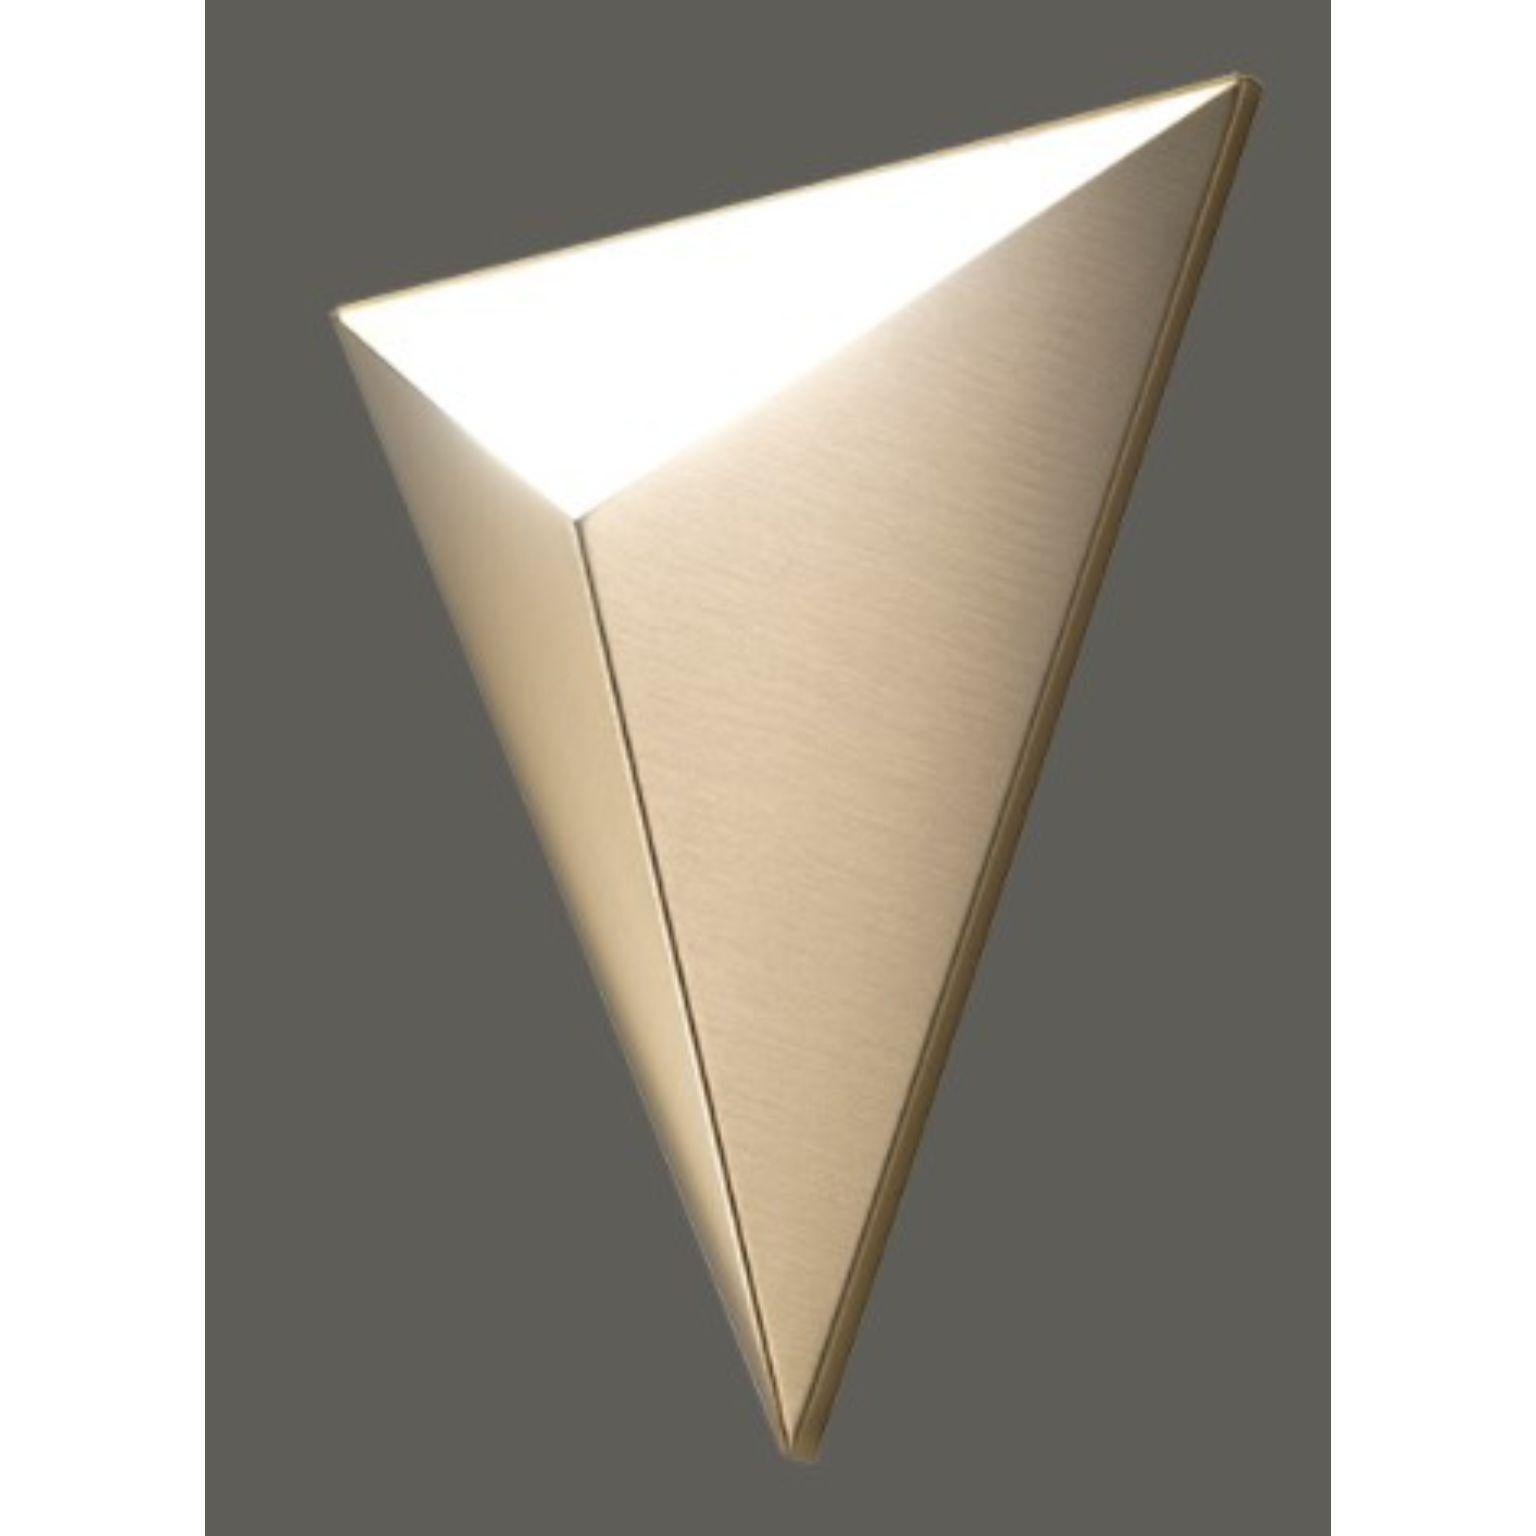 Tetra wall light by Emilie Cathelineau
Dimensions: D 26 x W 11 X H 31 cm
Materials: solid brass, polycarbonate diffuser.
Others finishes are available.

All our lamps can be wired according to each country. If sold to the USA it will be wired